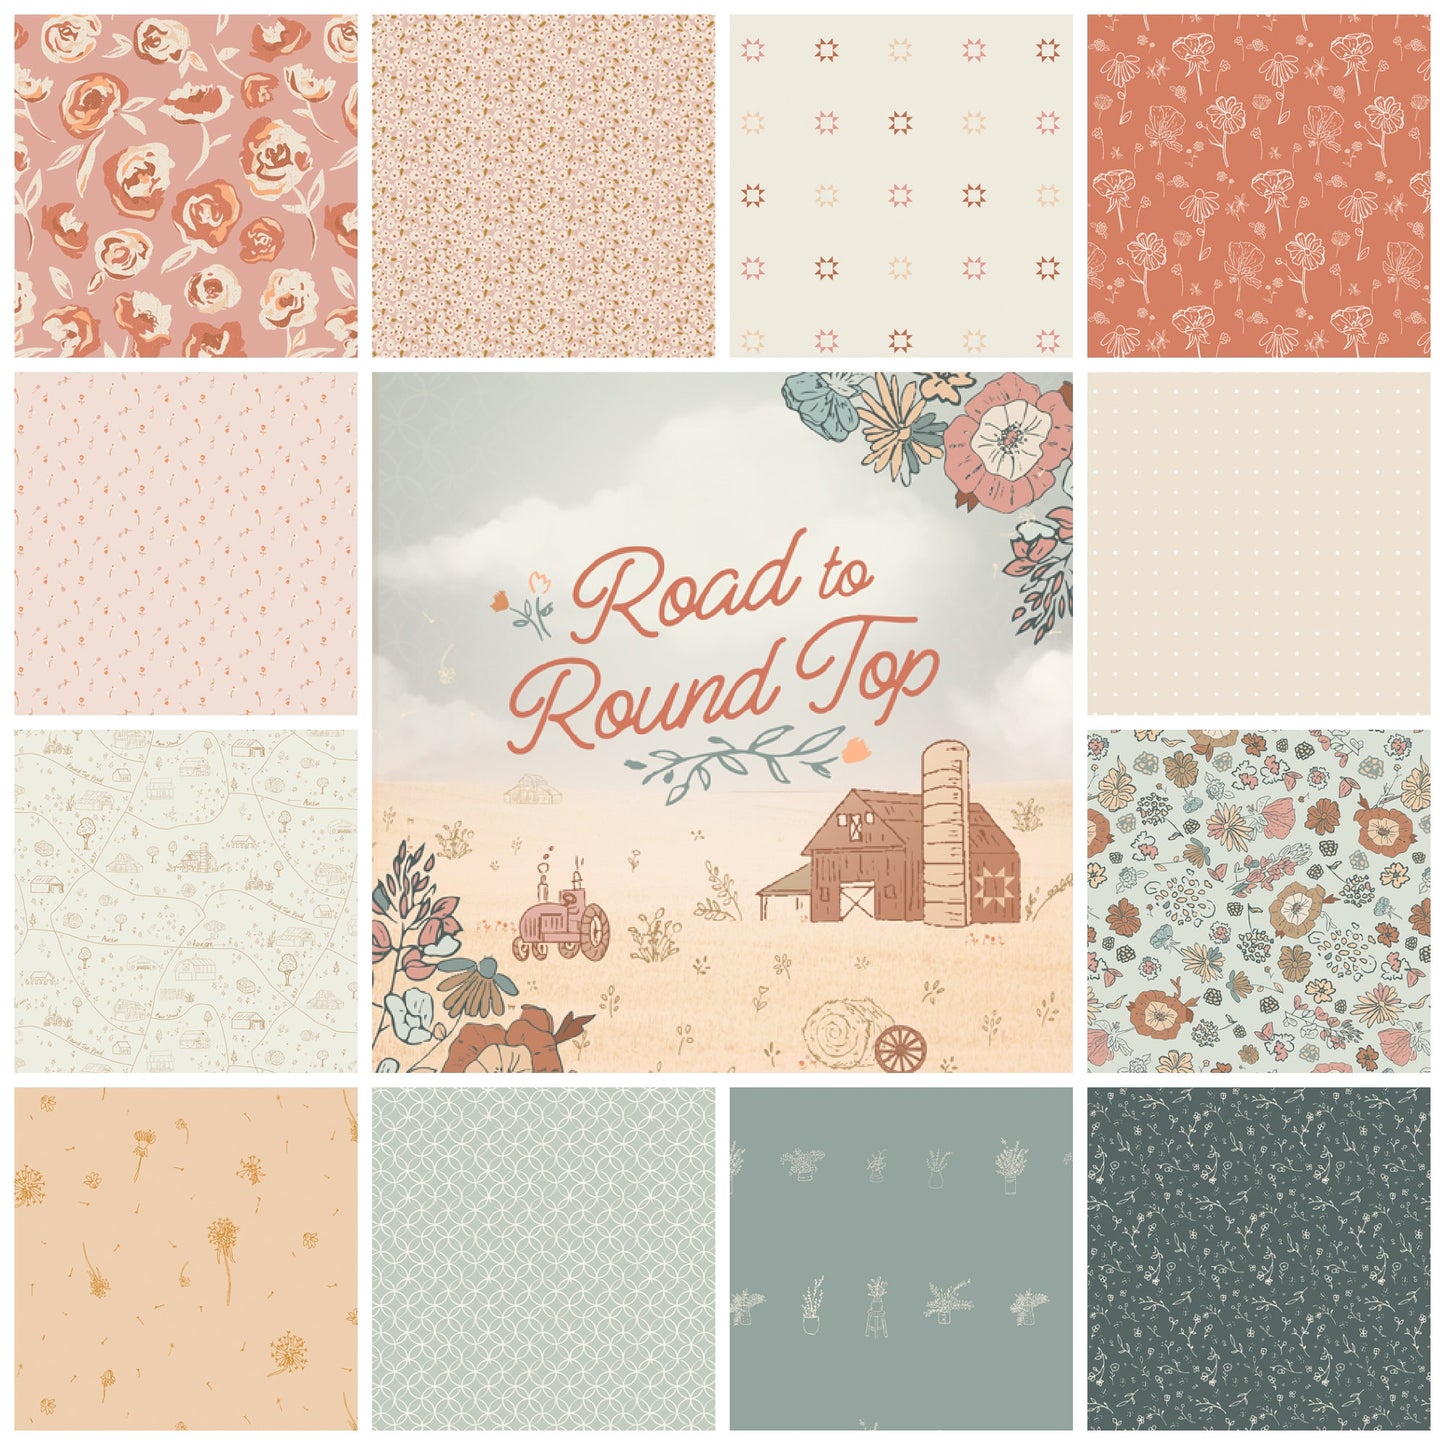 Road to Round Top - Simply Stated Print - by Elizabeth Chappell for Art Gallery Fabrics